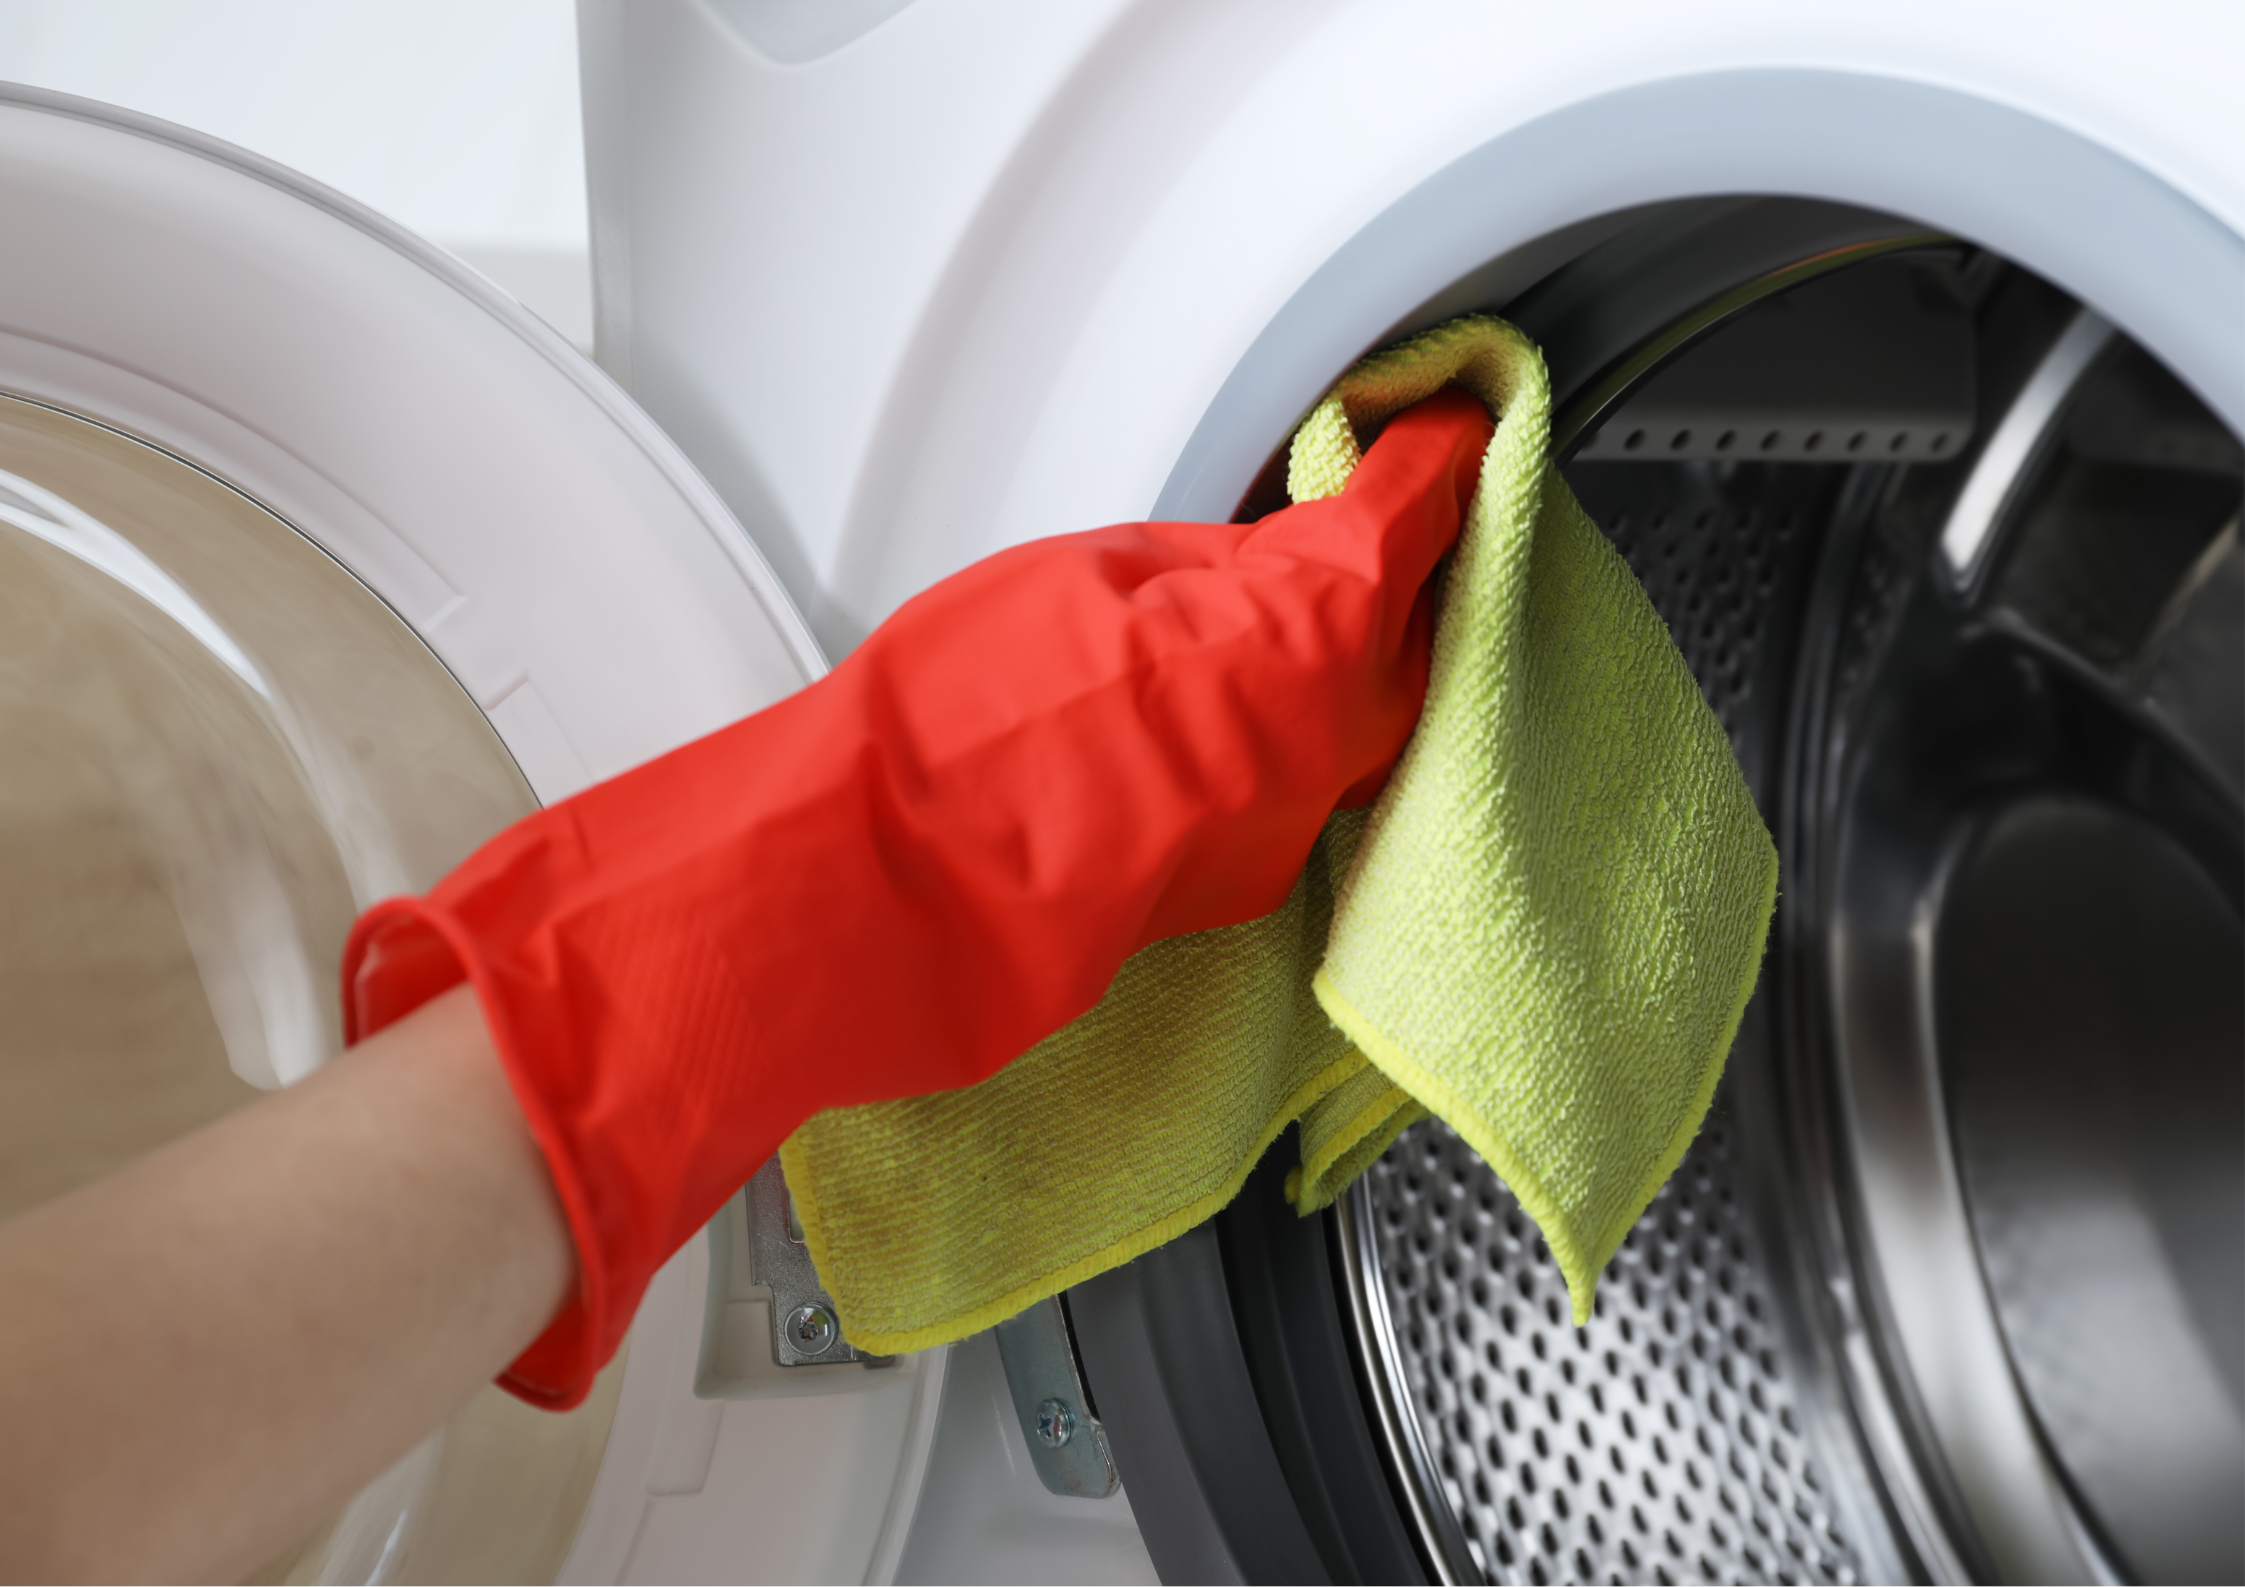 Washing machine deep cleaning is necessary to maintain hygiene.